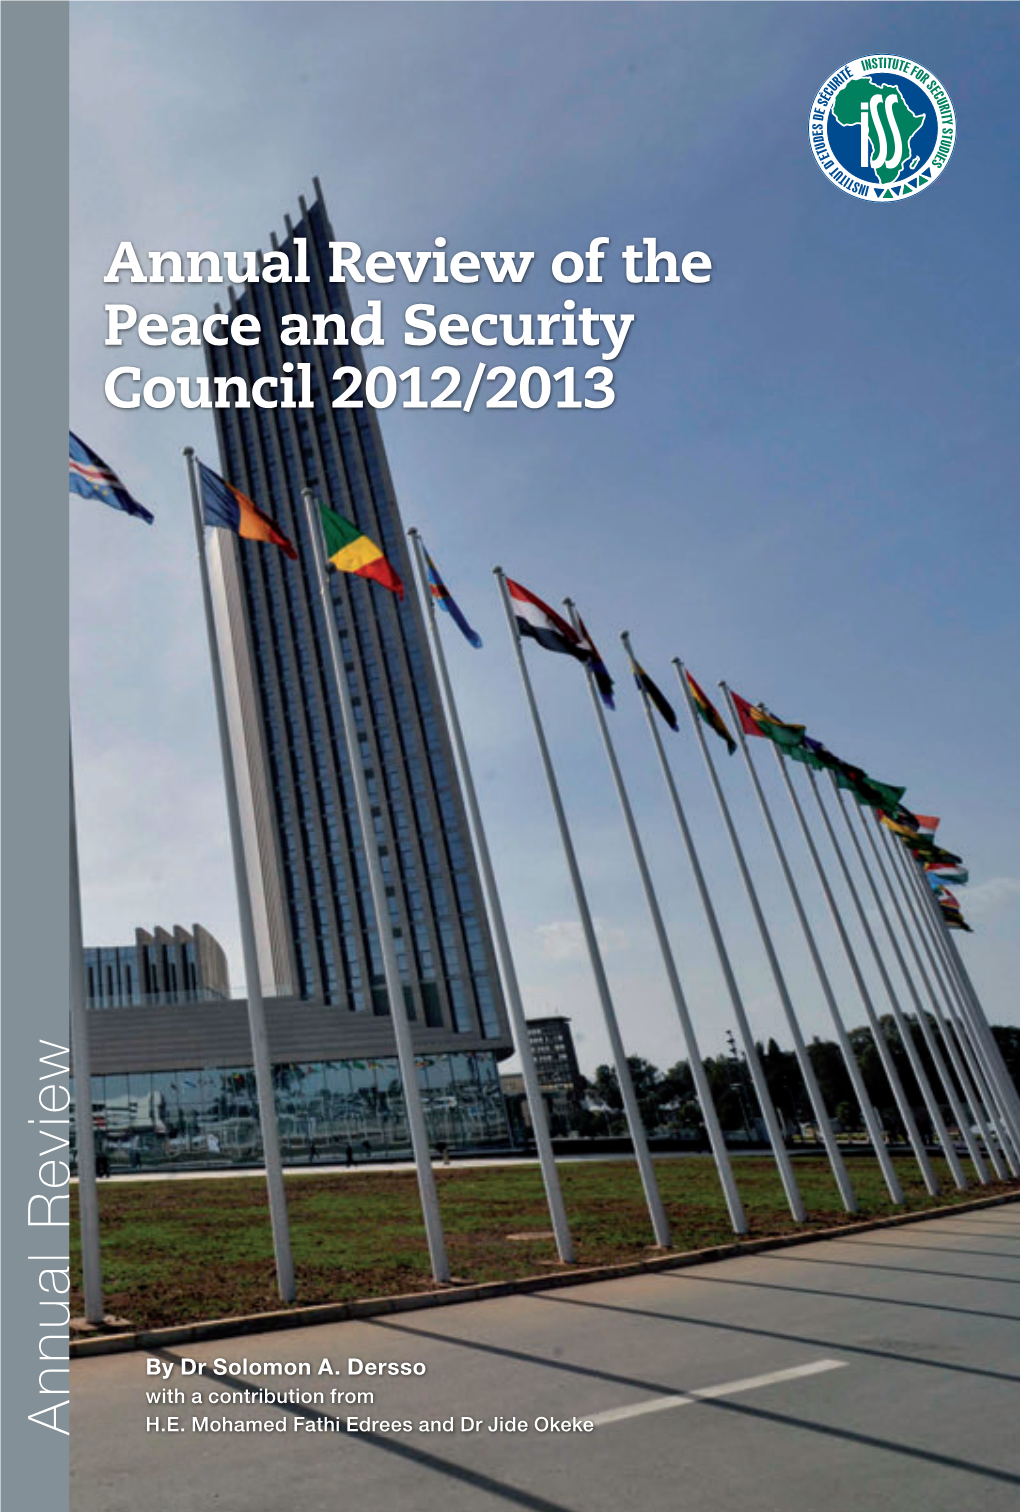 ANNUAL REVIEW of the PEACE and SECURITY COUNCIL 2012/2013 Eidel S and Sweden